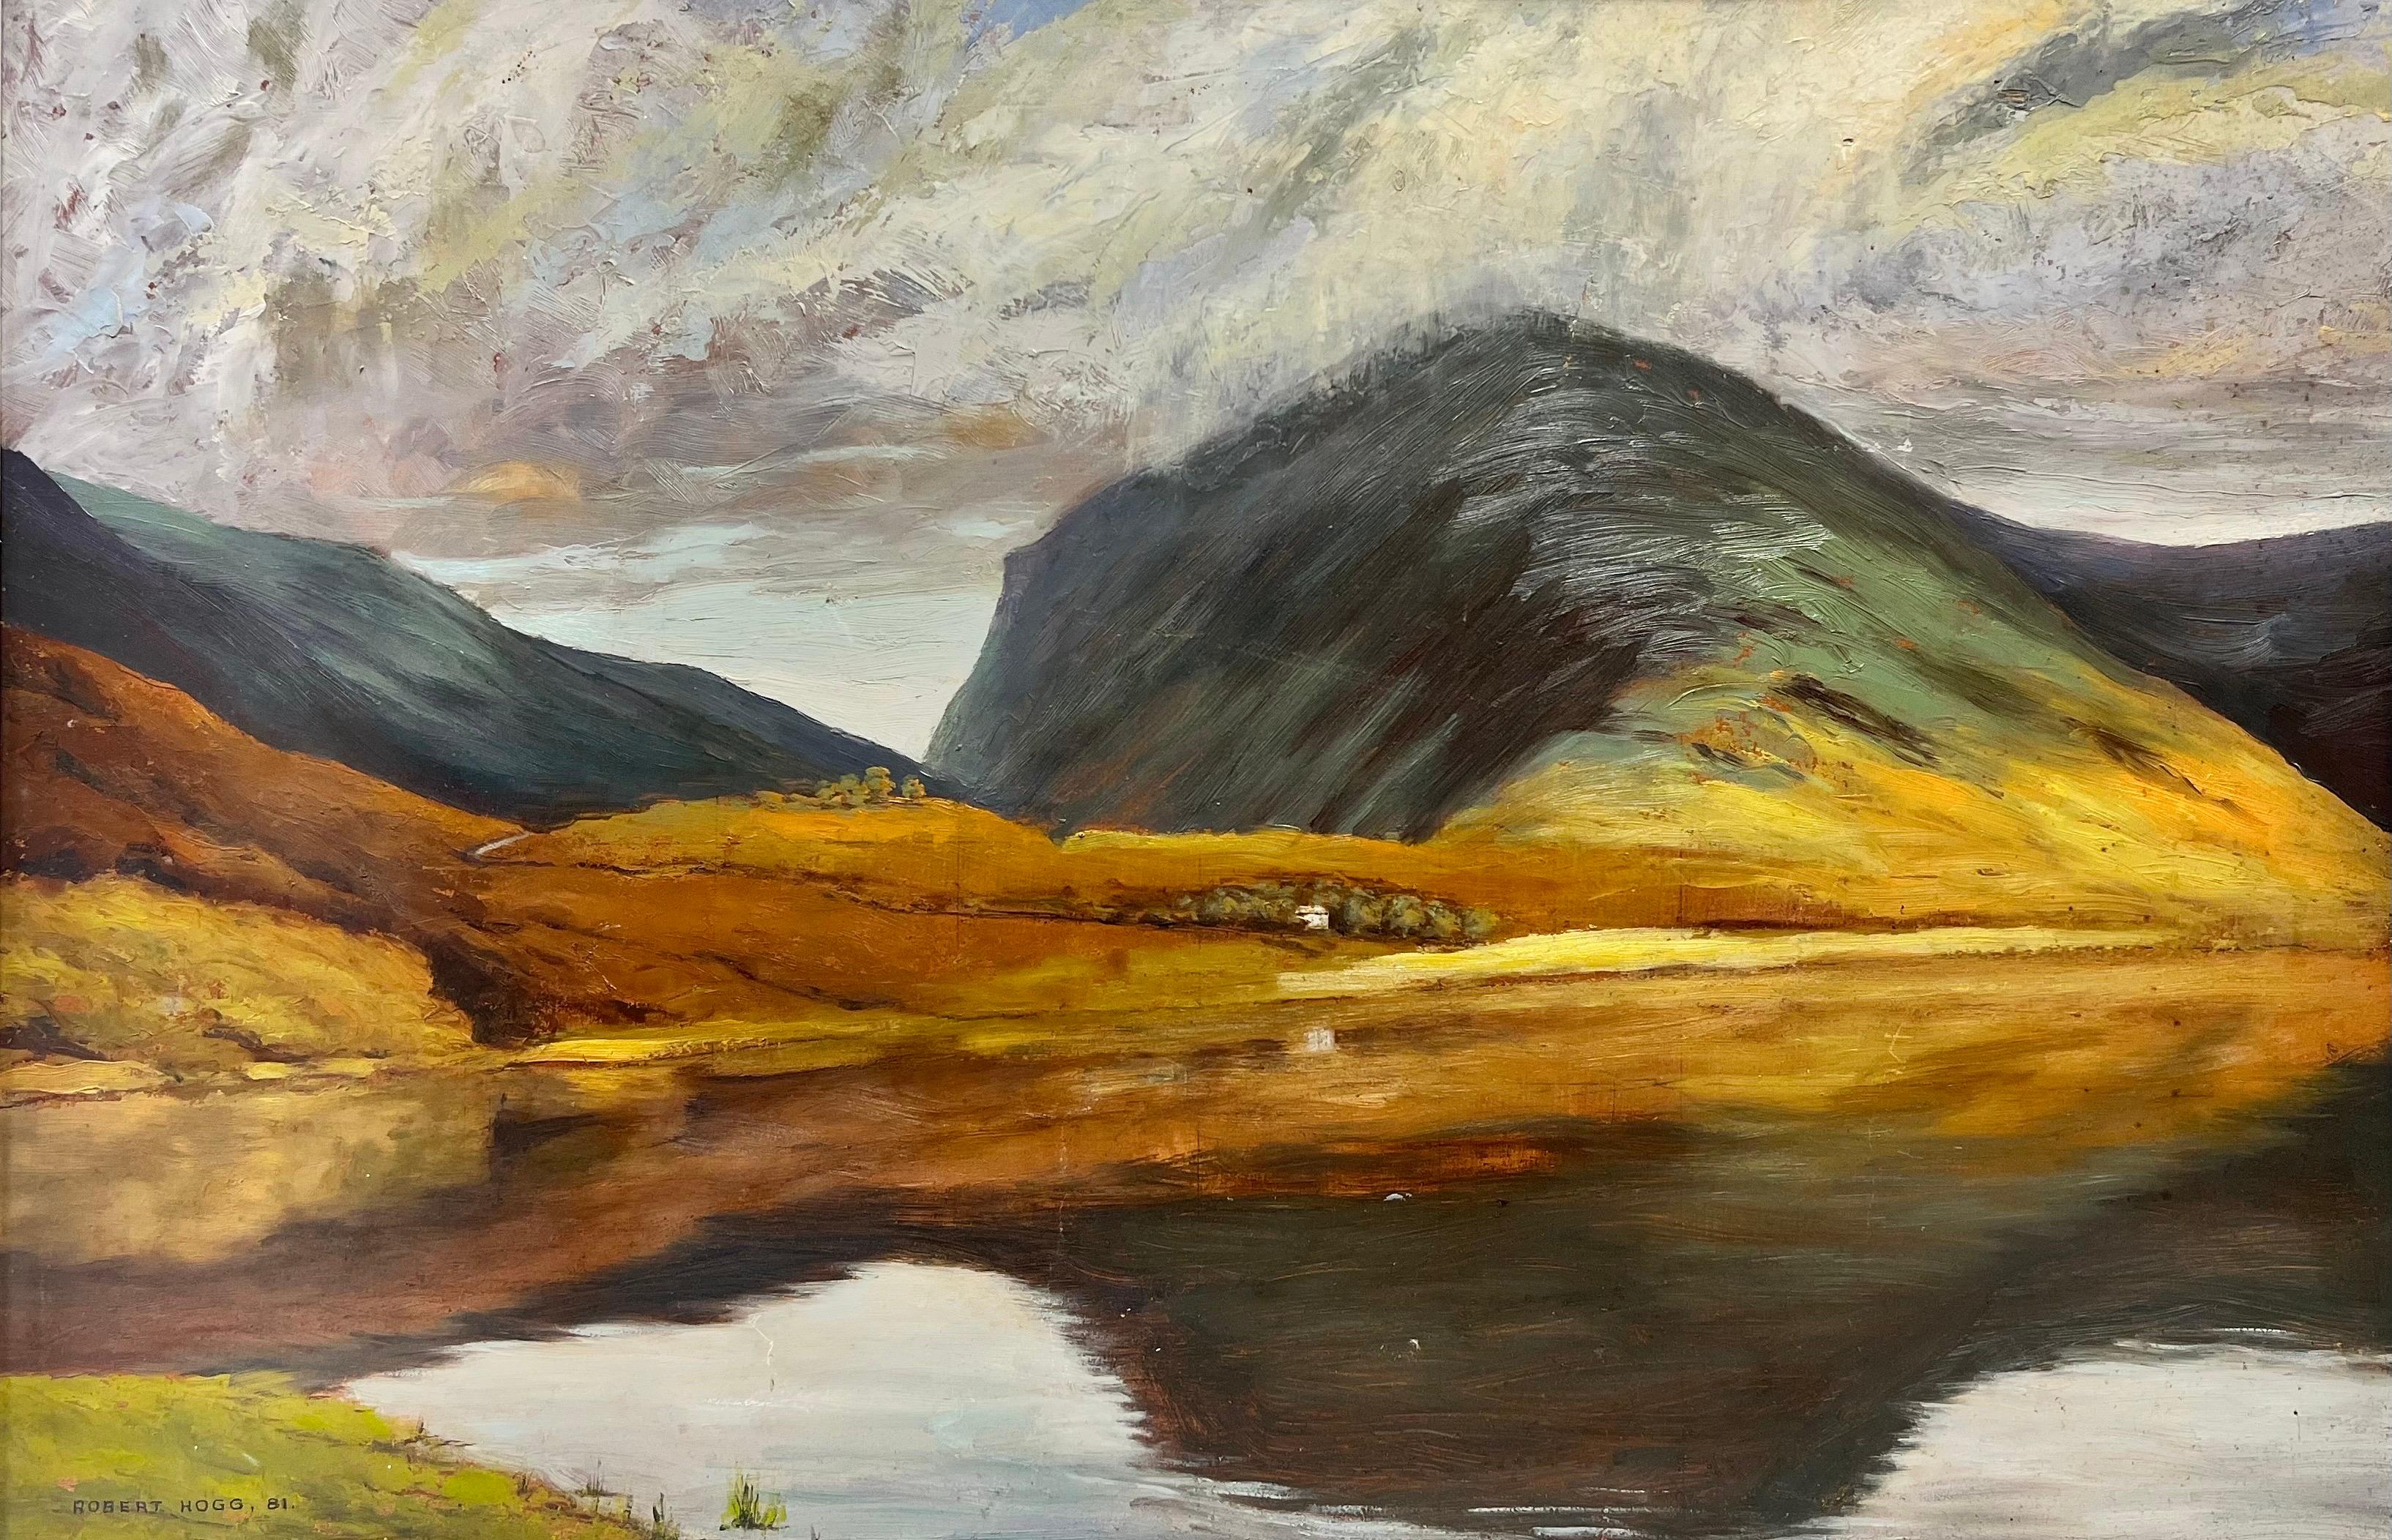 Robert Hogg Landscape Painting - Buttermere Lake District Moody & Atmospheric Landscape Clouds over Lake, signed